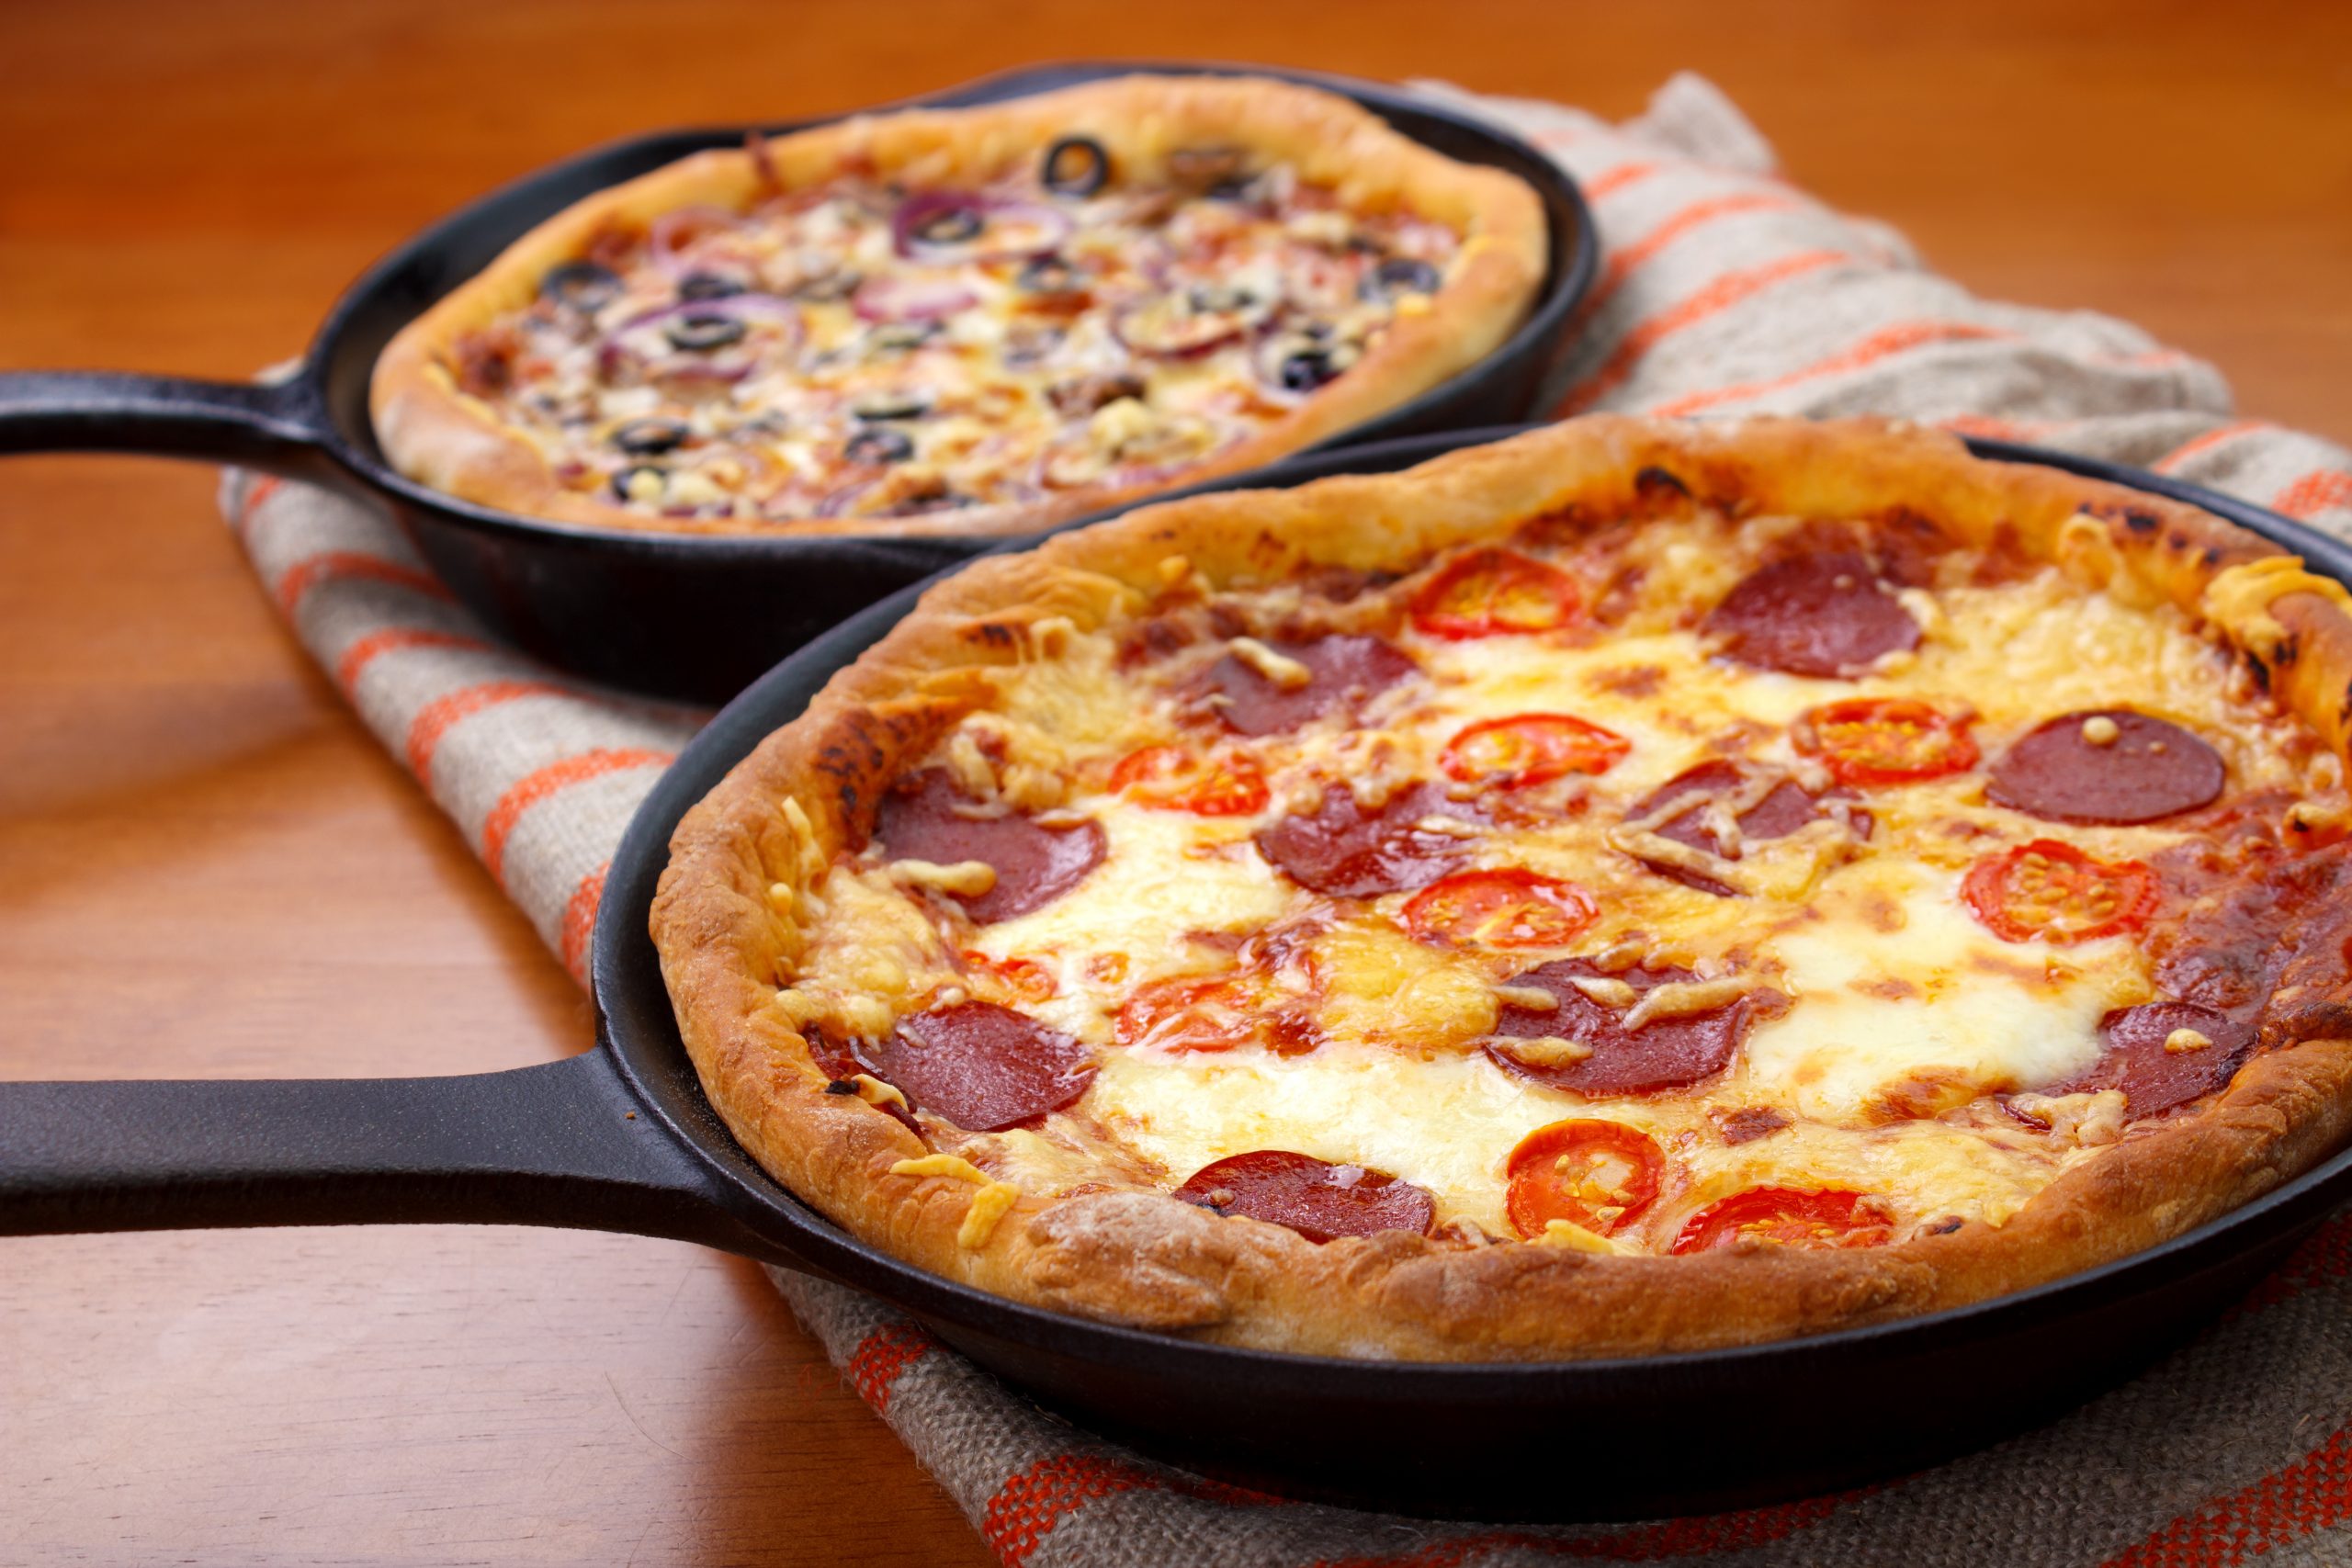 California Home Goods Cast Iron 14-Inch Pre-Seasoned Pizza Pan $24.95 from  $60 - Best Price! 